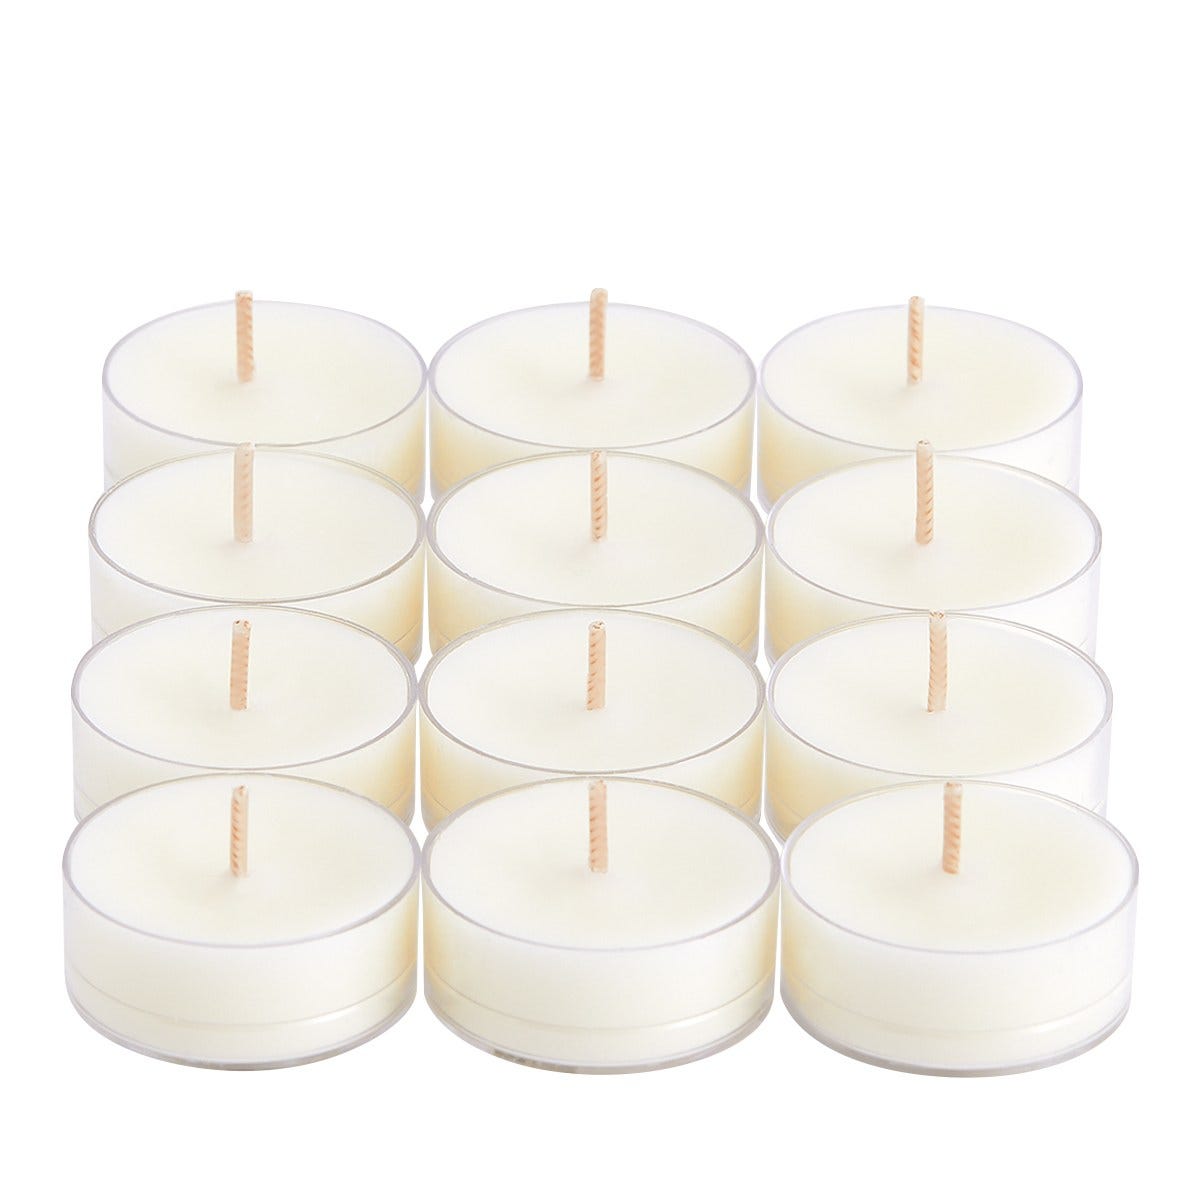 Solo Hike: mountain flora + air Universal Tealight® Candles - PartyLite US